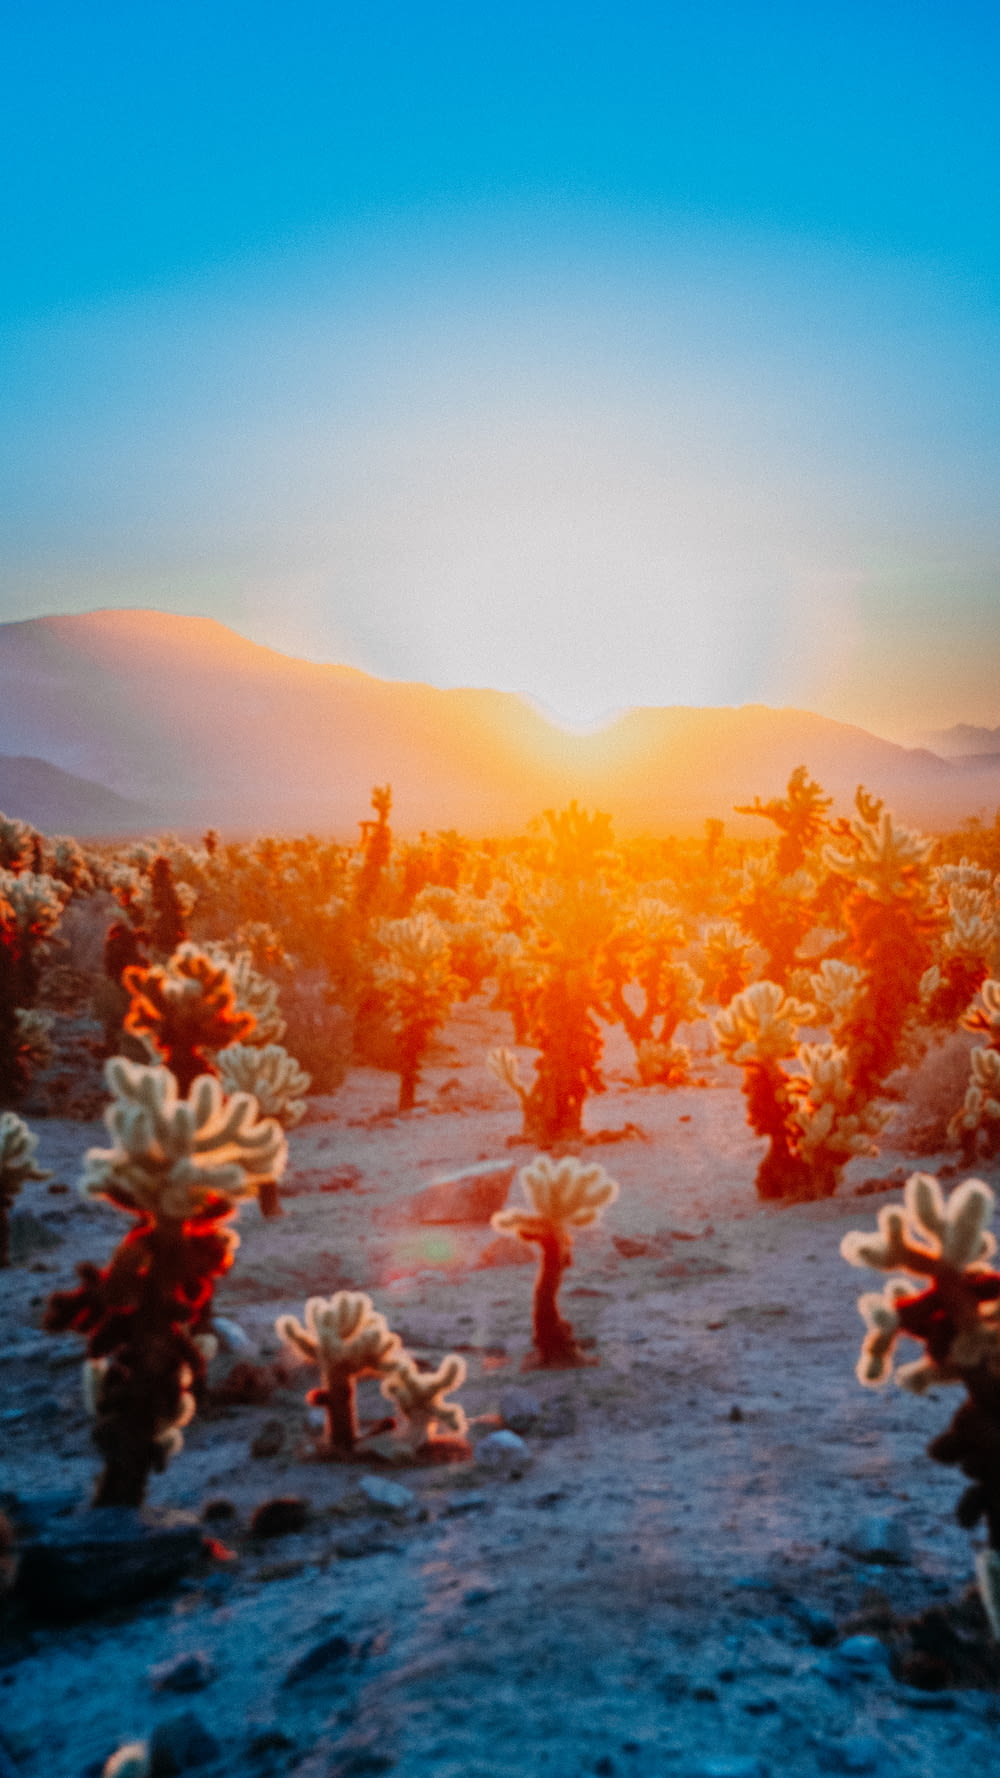 the sun is setting over the desert with many cacti